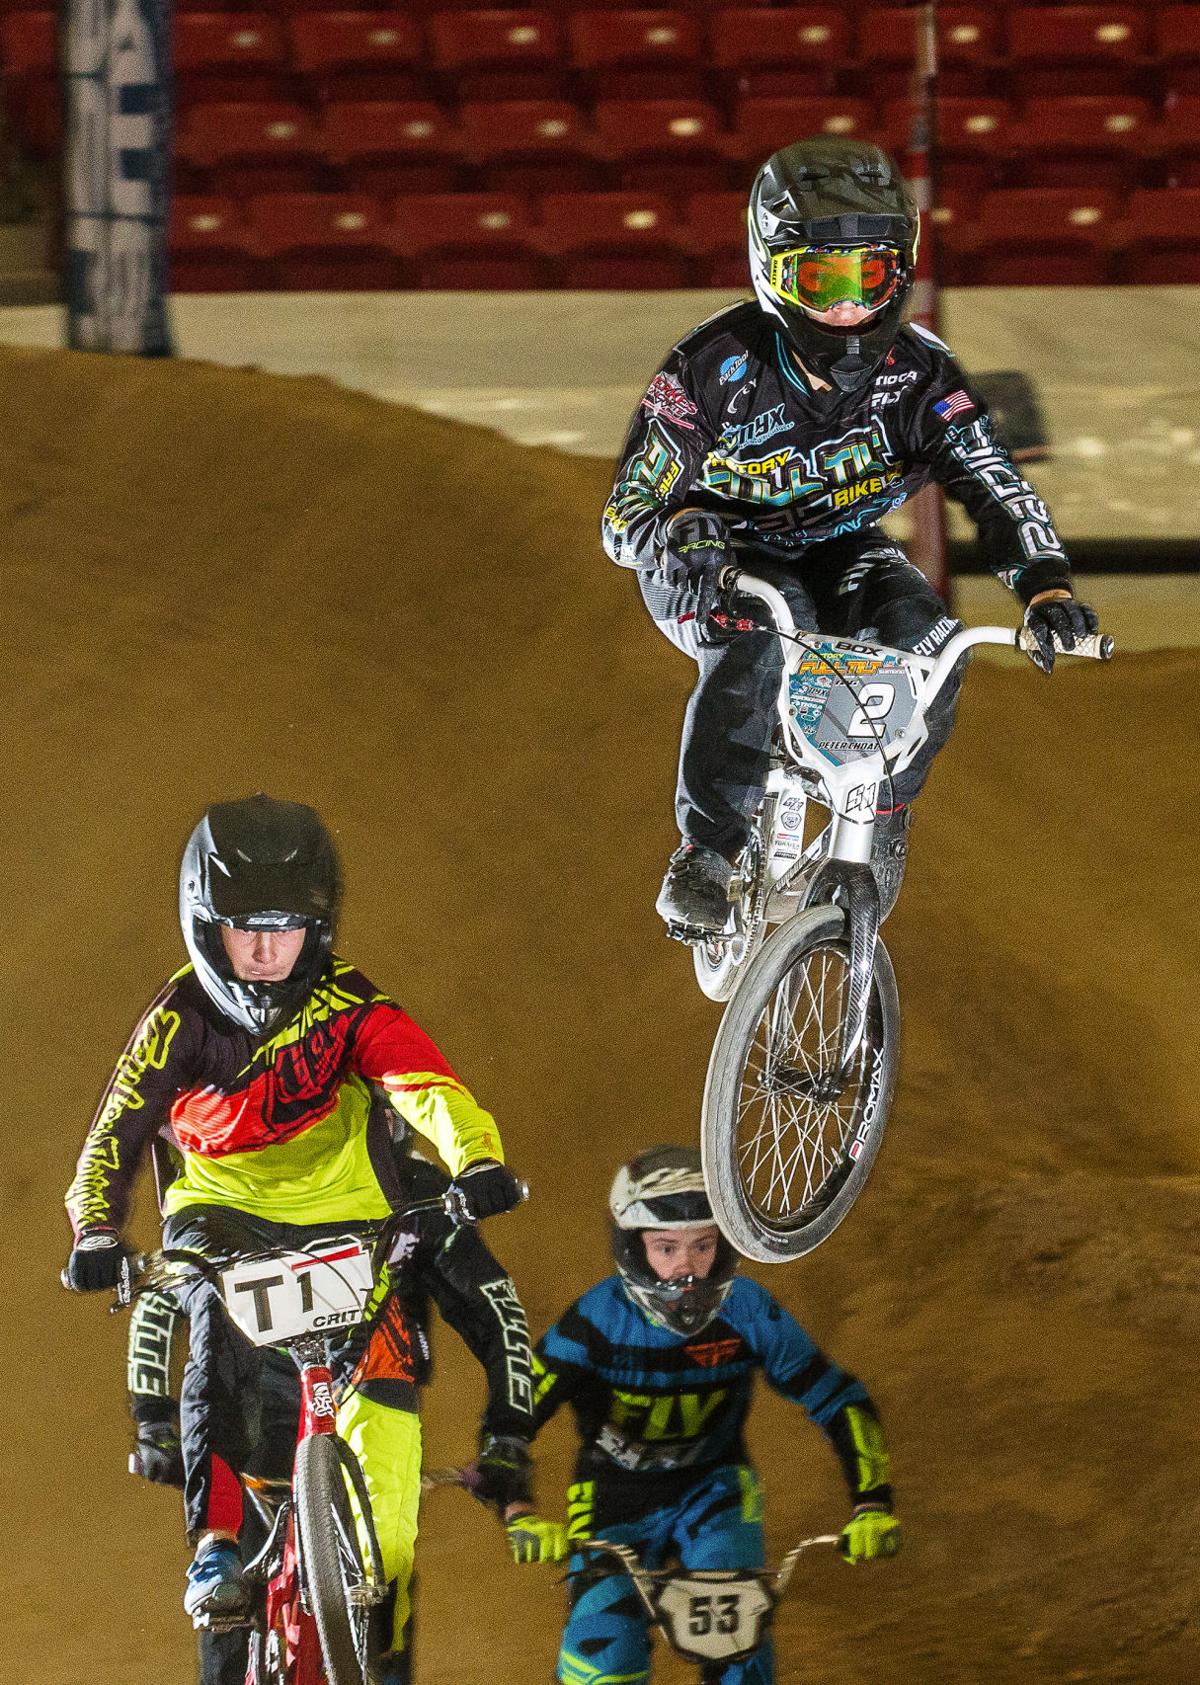 USA BMX Golden State Nationals returns to Bakersfield this weekend